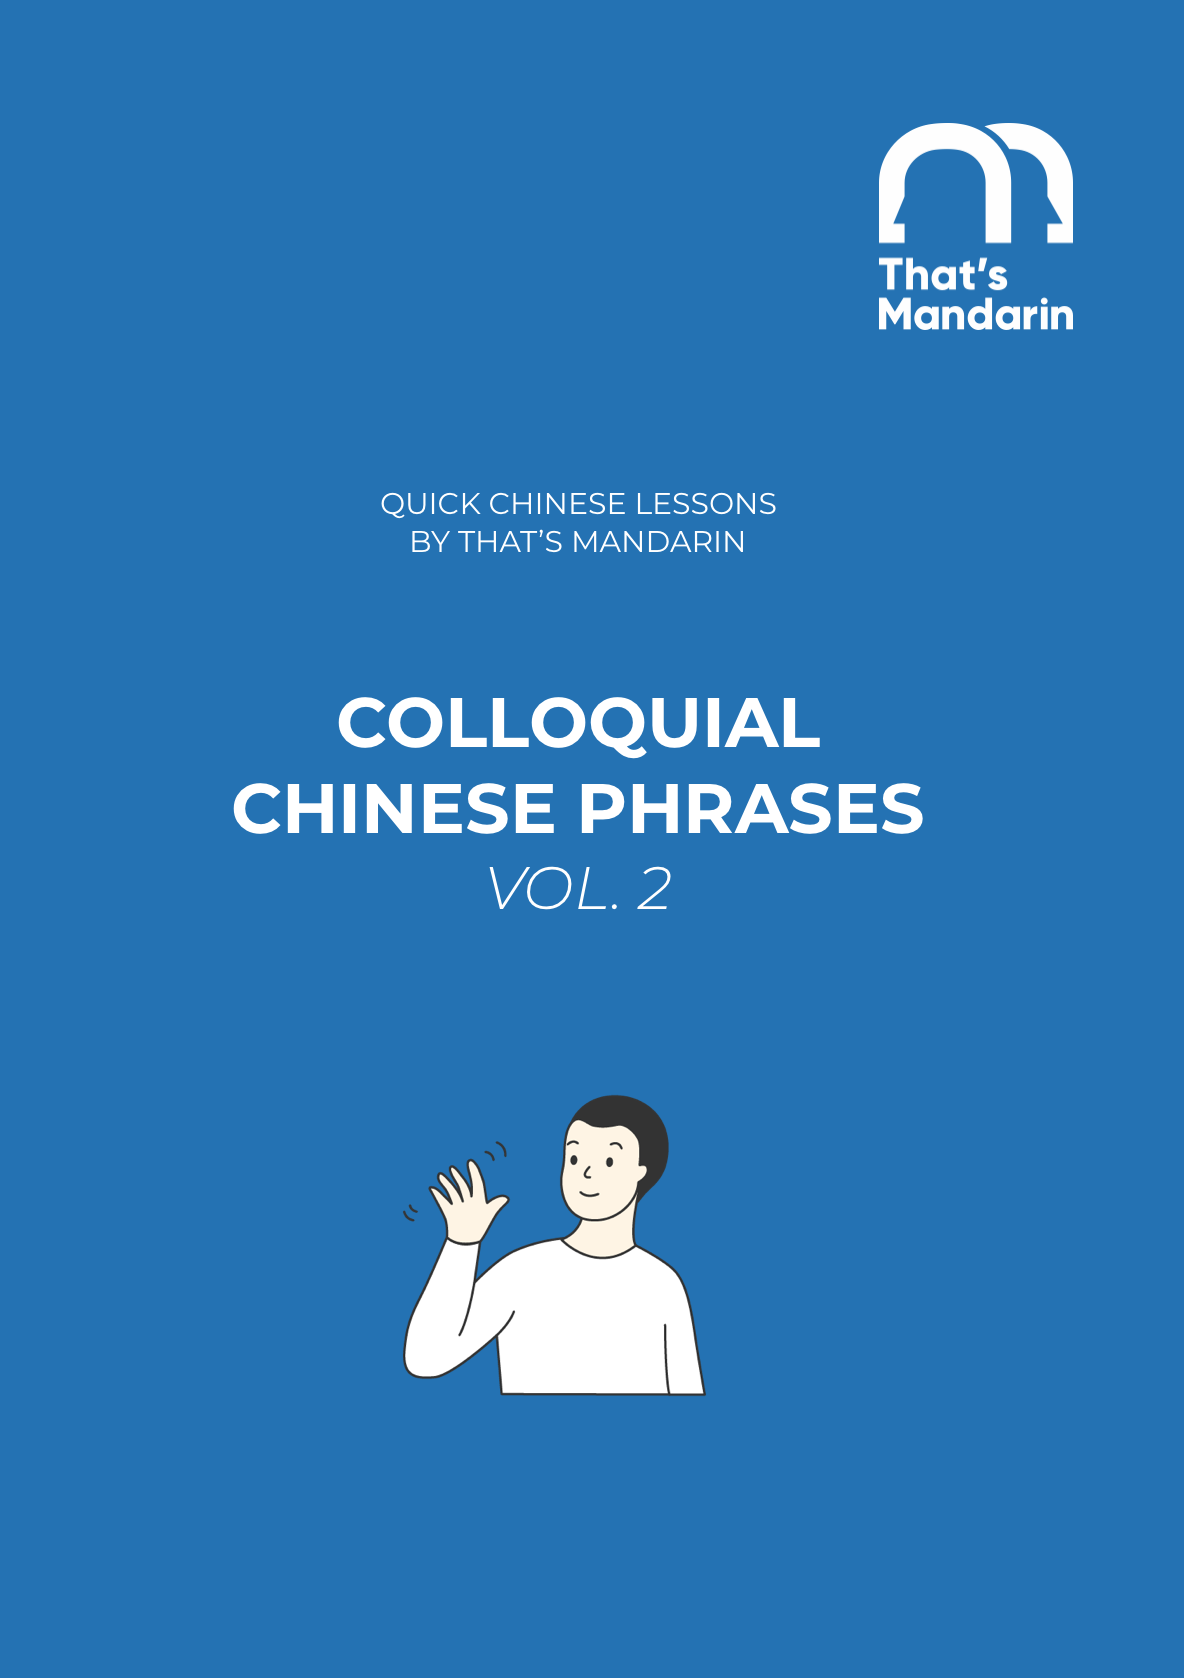 Colloquial Chinese Phrases, Vol. 2 by That's Mandarin PDF